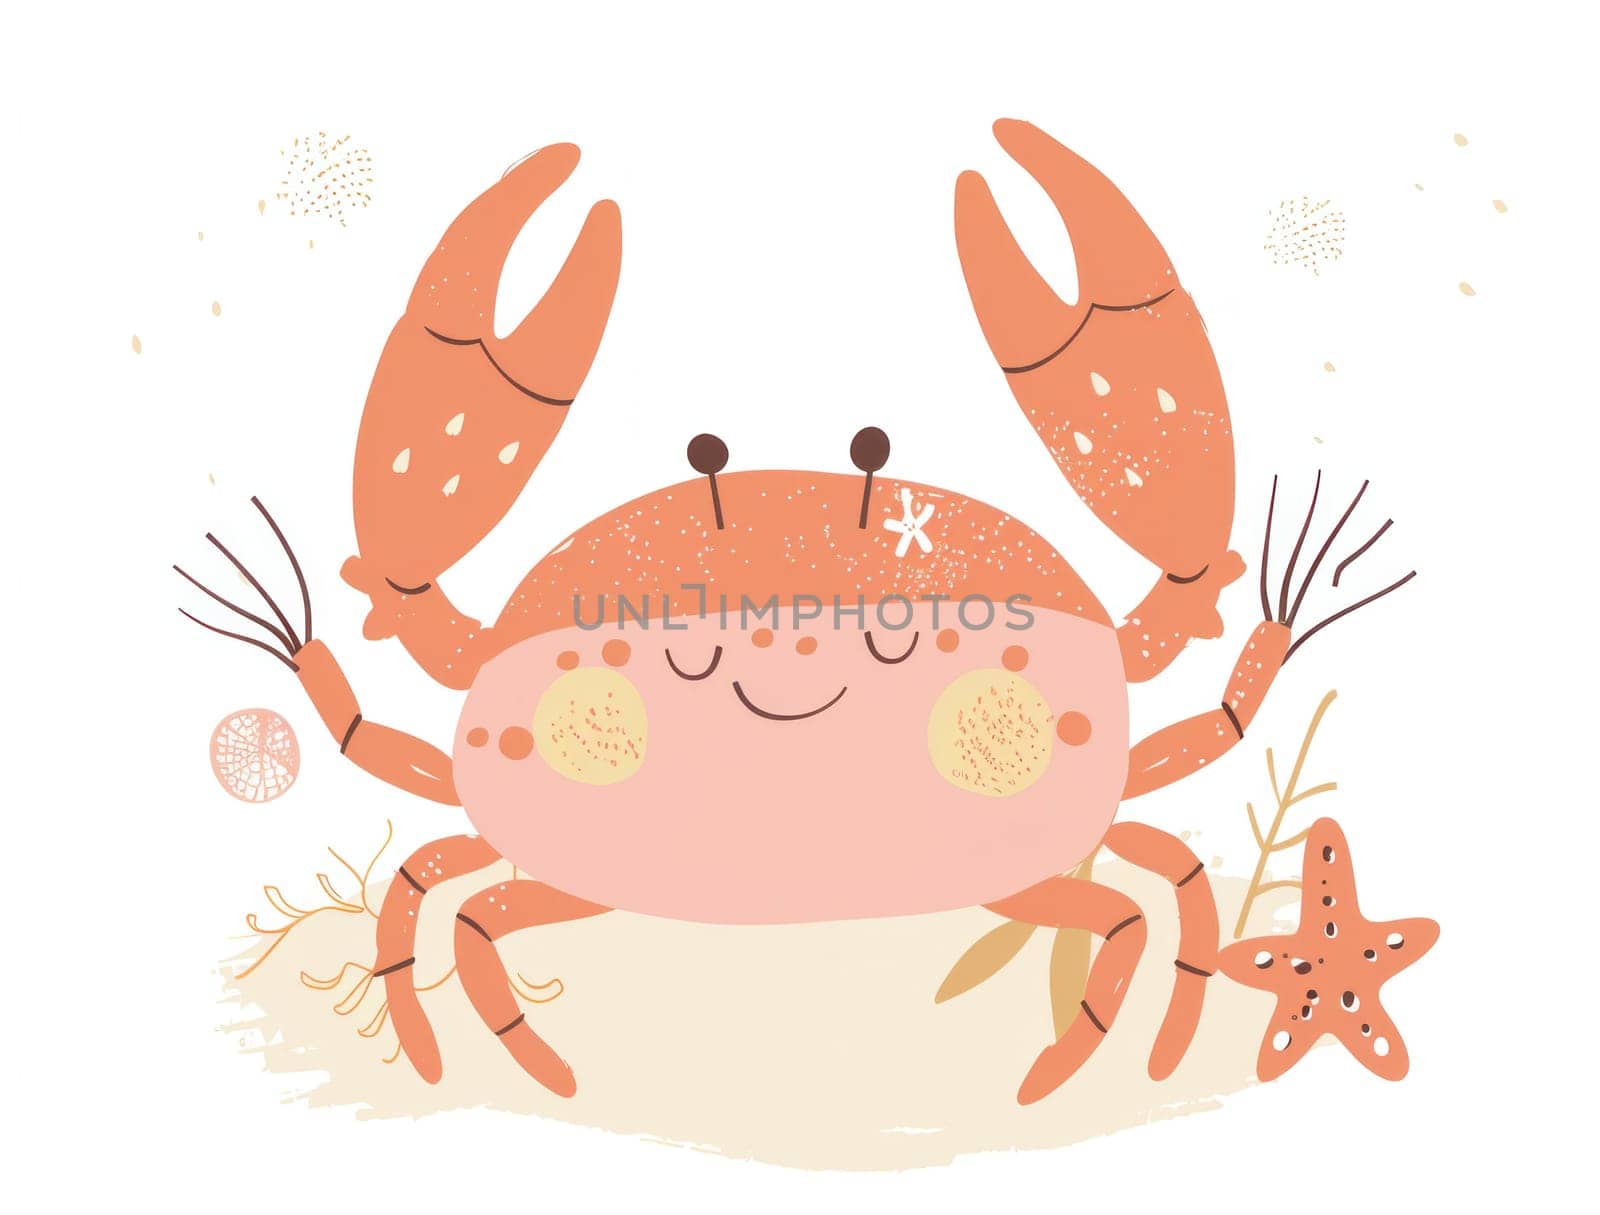 Crab on the beach with stars and sea shells background serene tropical seaside scene with marine life